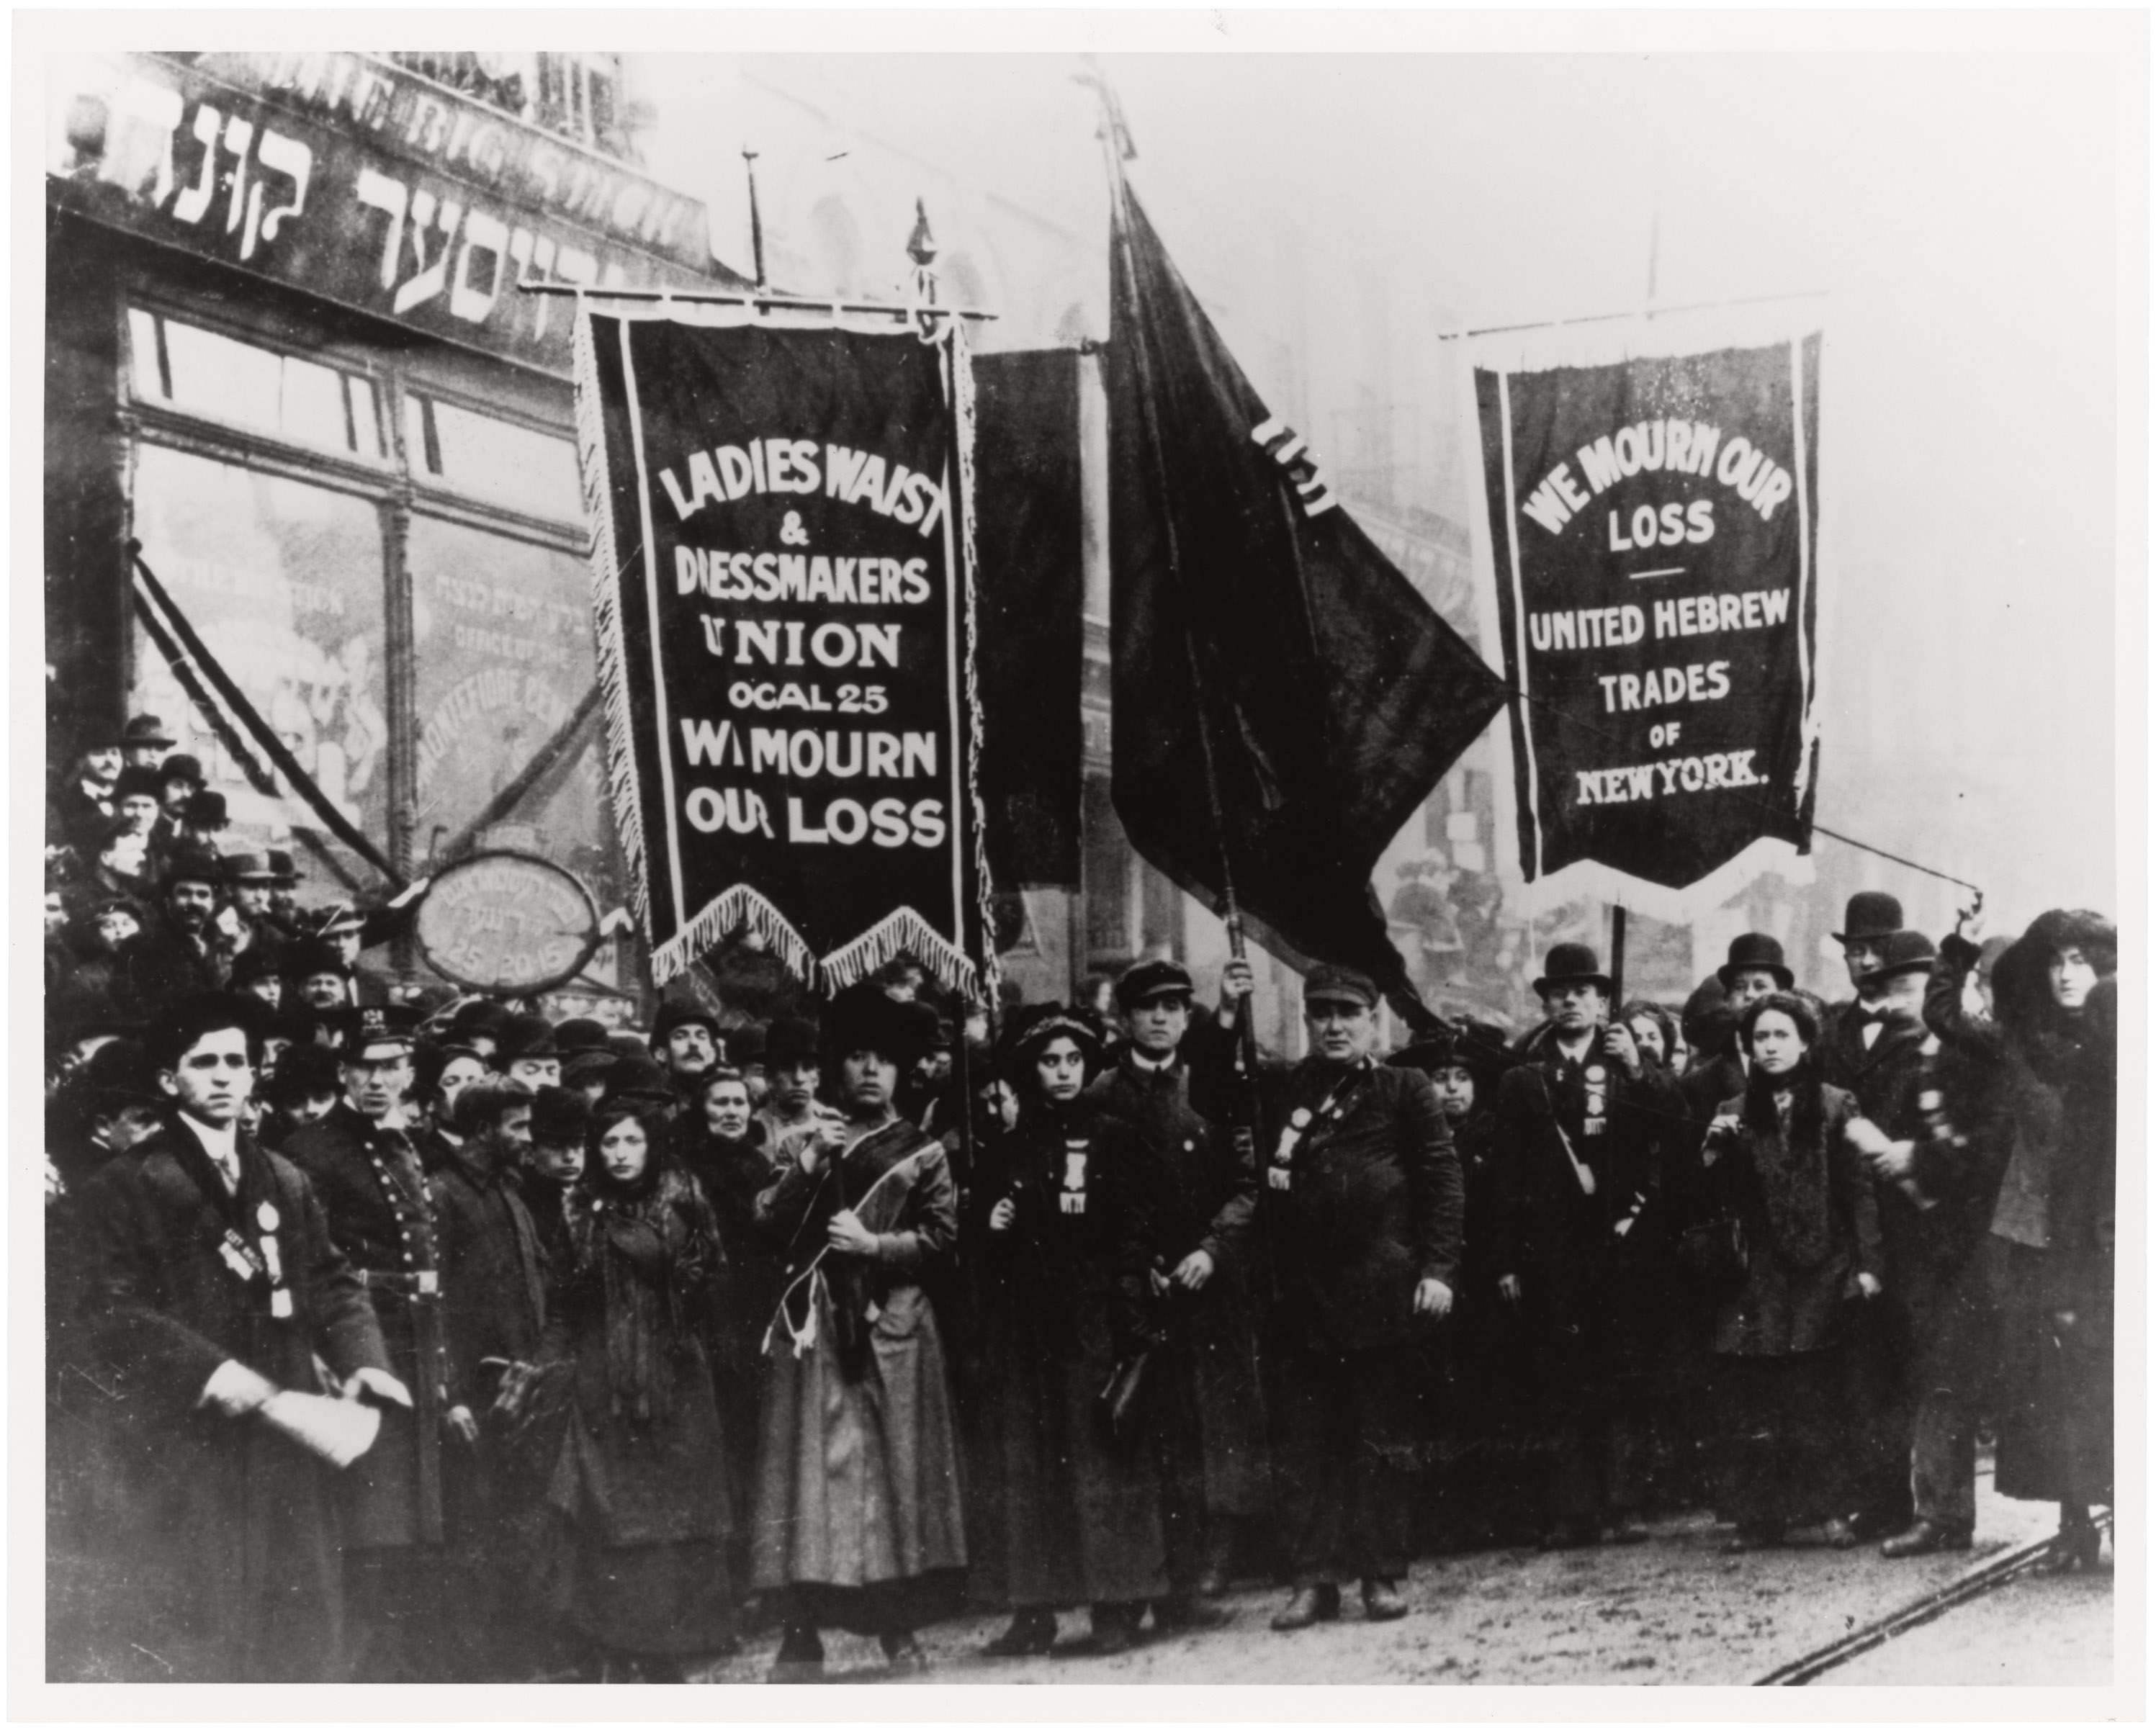 A black and white photo of a crowd of people standing together with large cloth banners. One banner says" Ladies Waist and Dressmakers Union Local 25, We mourn our loss" and the other reads "We mourn our loss, United Hebrew trades of New York".